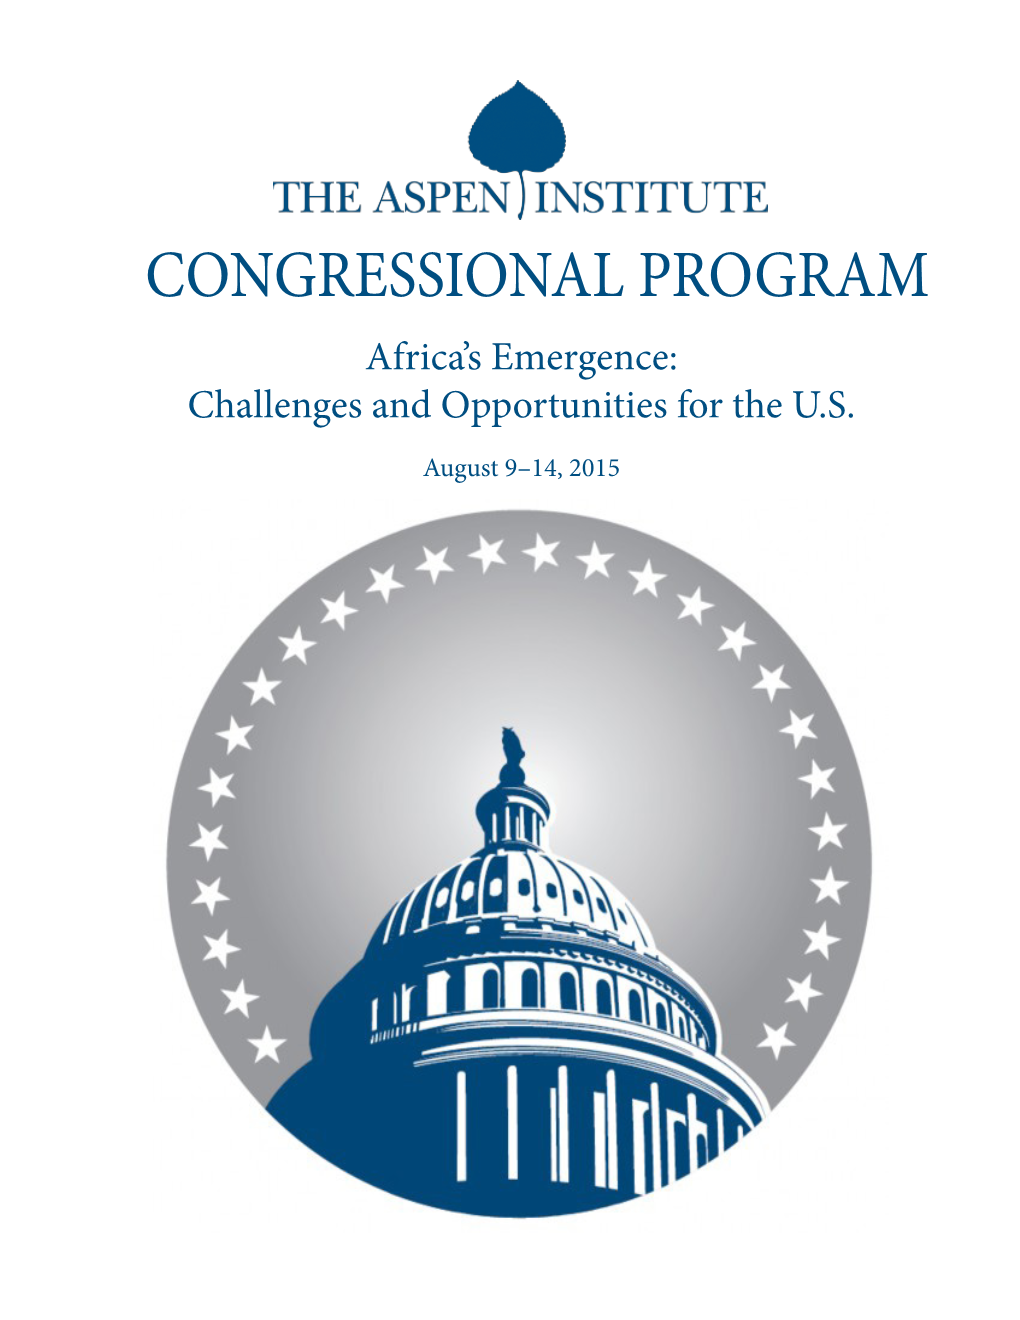 CONGRESSIONAL PROGRAM Africa’S Emergence: Challenges and Opportunities for the U.S